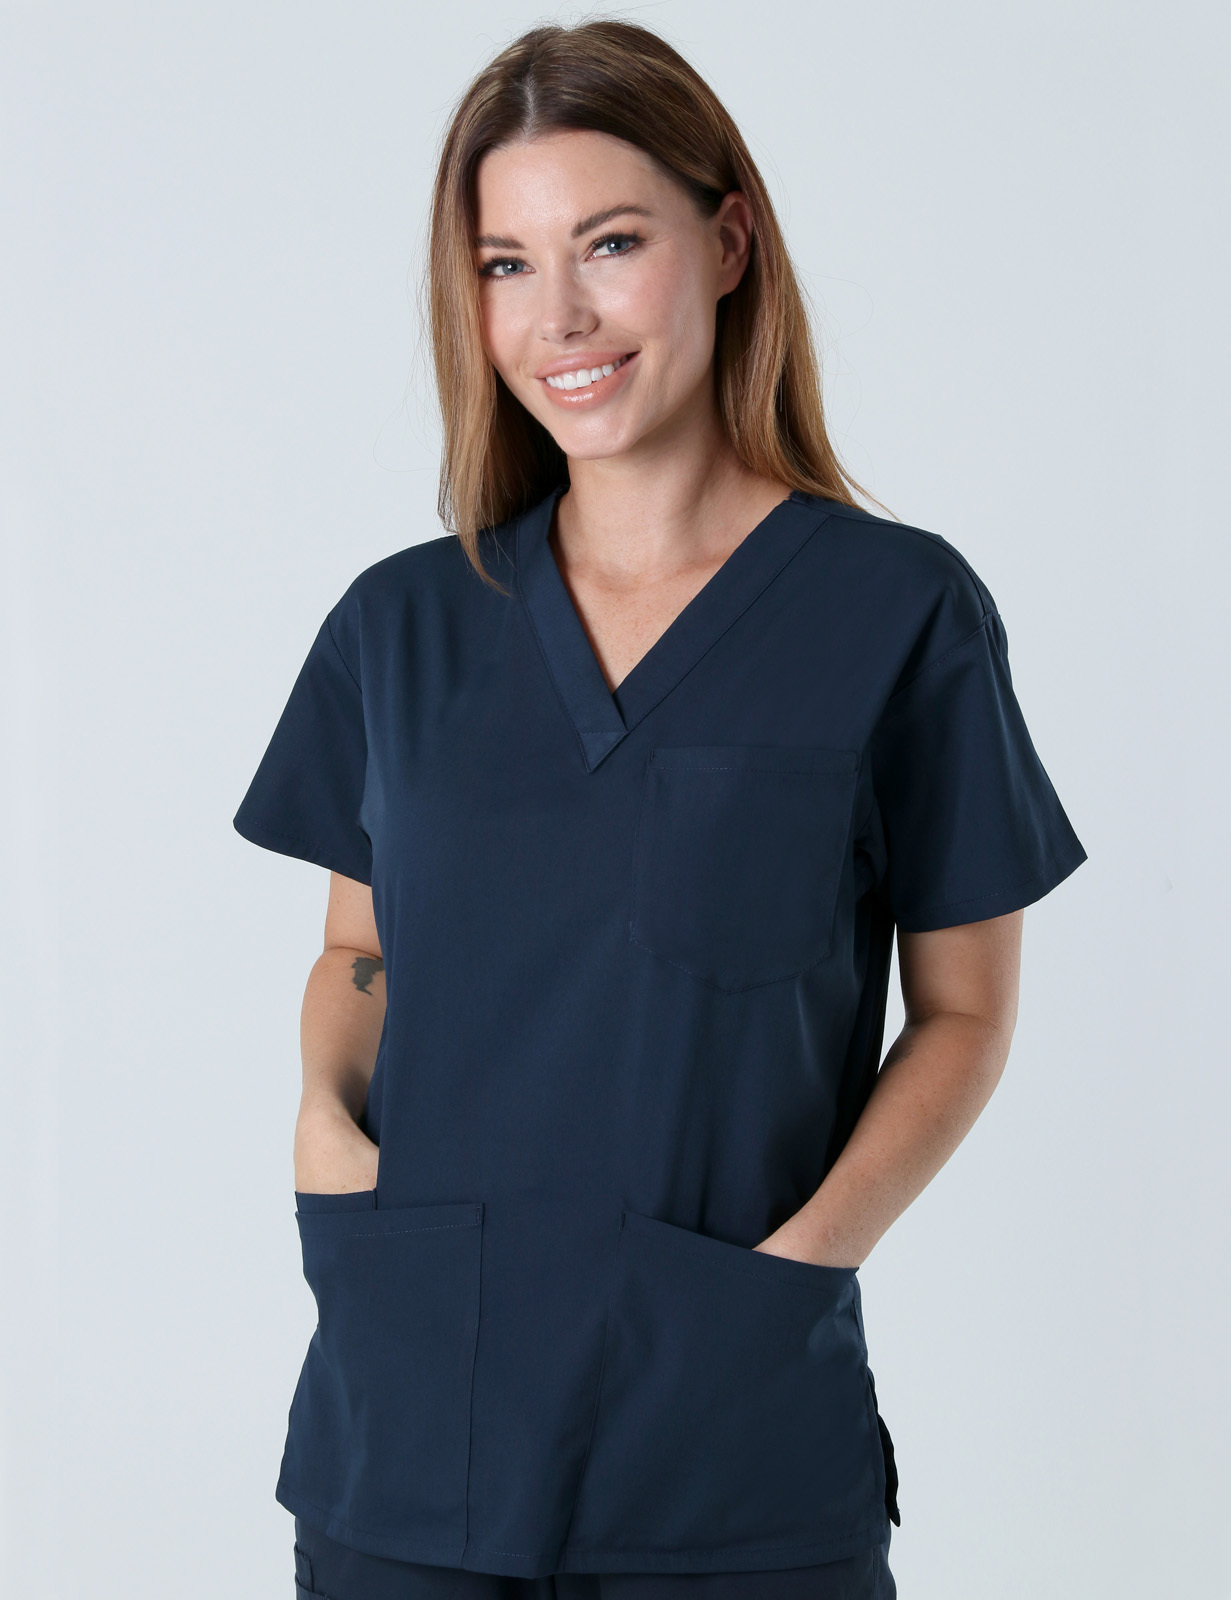 Gladstone Hospital - ED Nurse Practitioner (4 Pocket Scrub Top and Cargo Pants in Navy incl Logos)